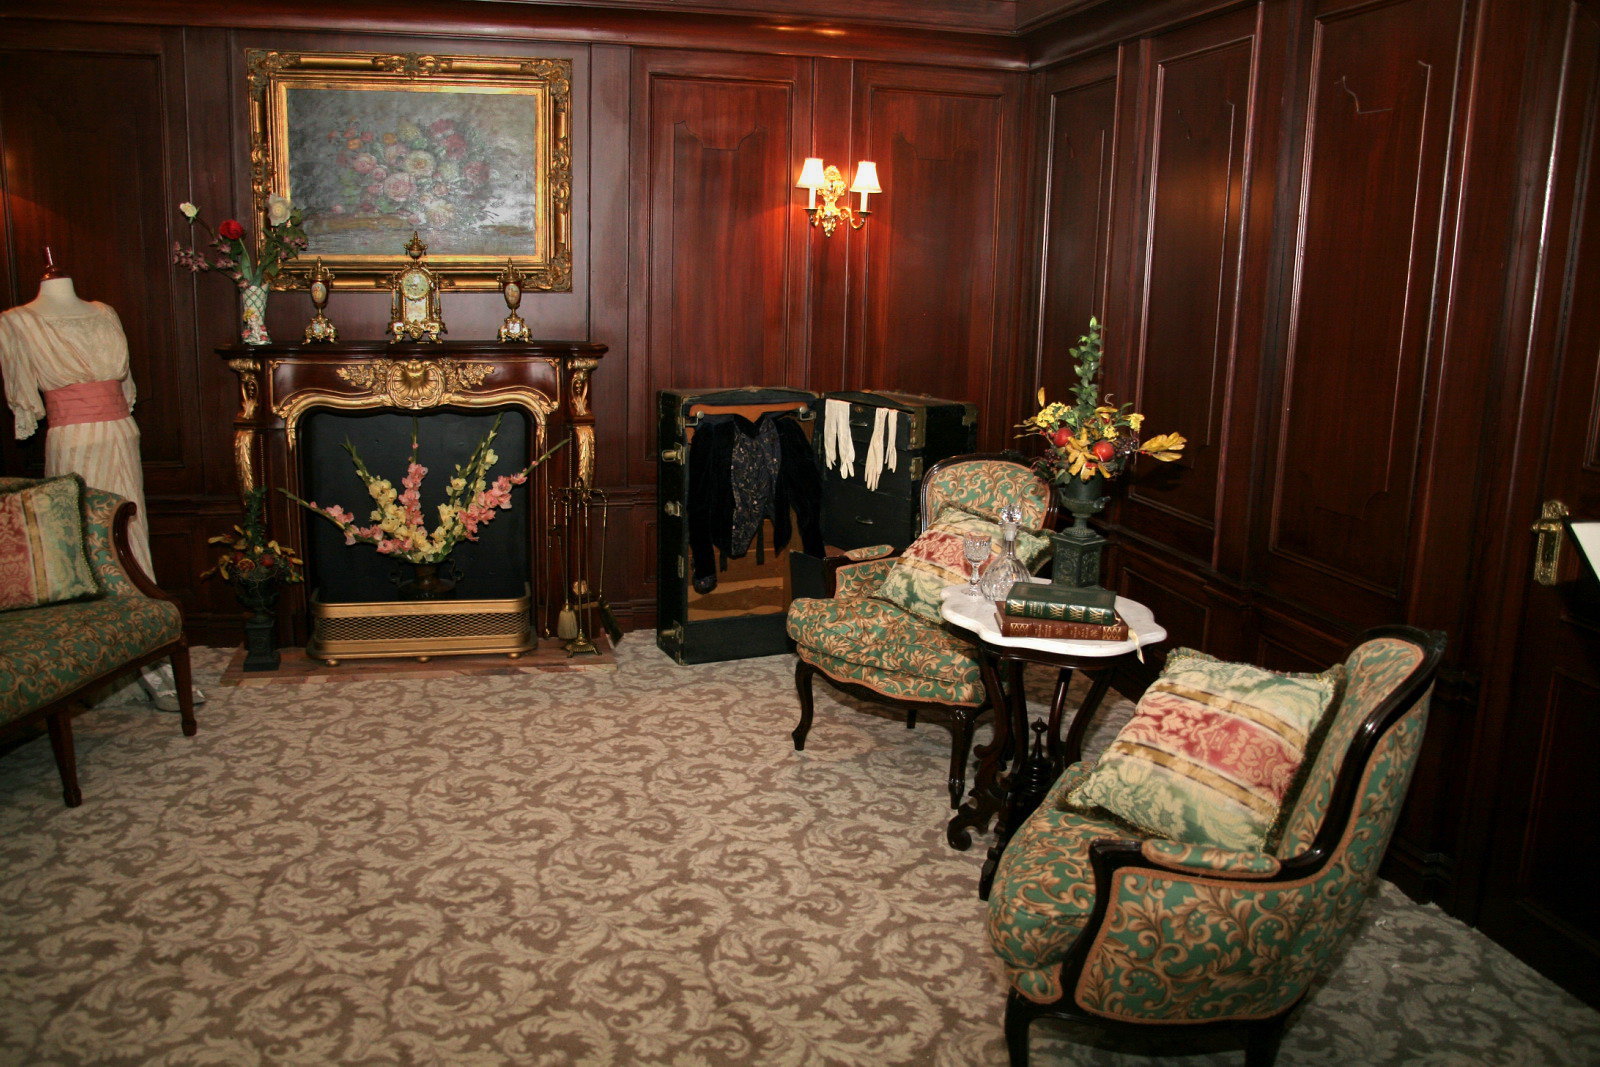 Titanic's first class stateroom. Credit Cliff1066